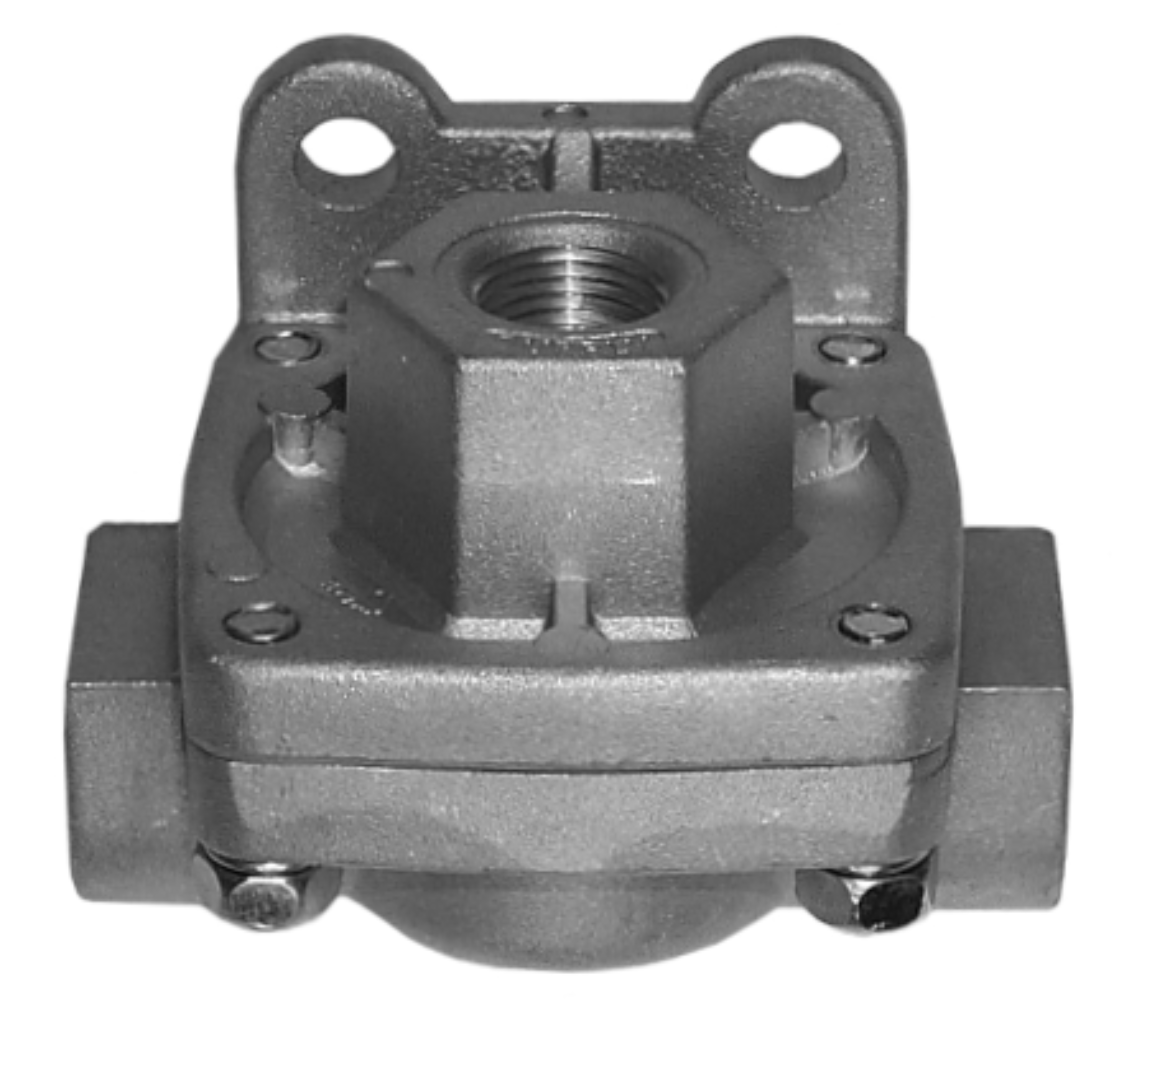 Picture of QUICK RELEASE VALVE QR1 STYLE (1/2" SUPPLY, 3/8" DELIVERY, 1 PSI)
(REPLACES 101487, 229860, 274999, 5000686)